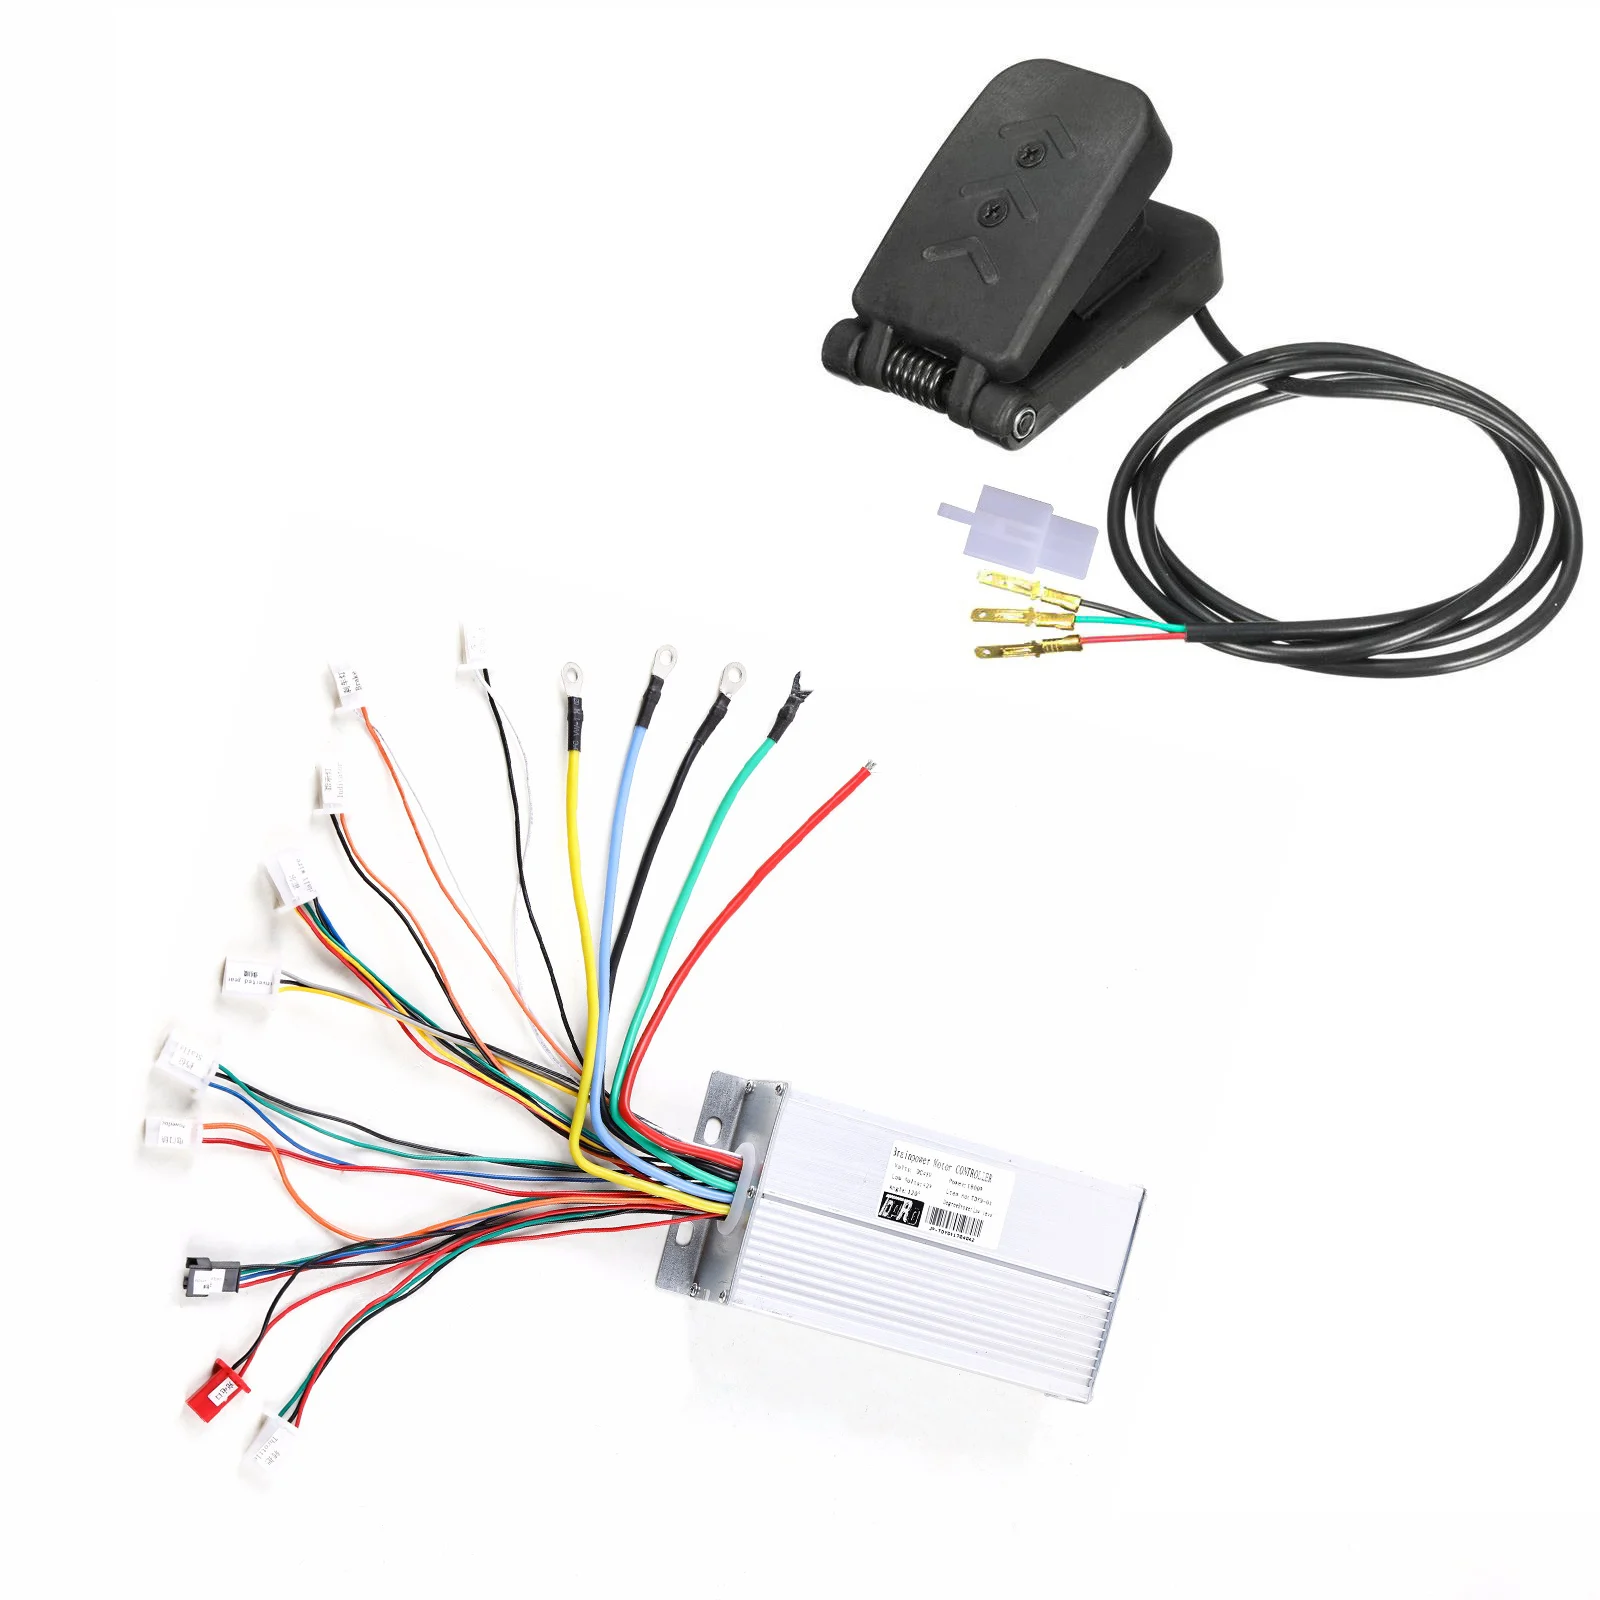 Controller Box 48V 1800W Electric Bicycle E-bike Scooter Brushless DC Motor Speed Controller